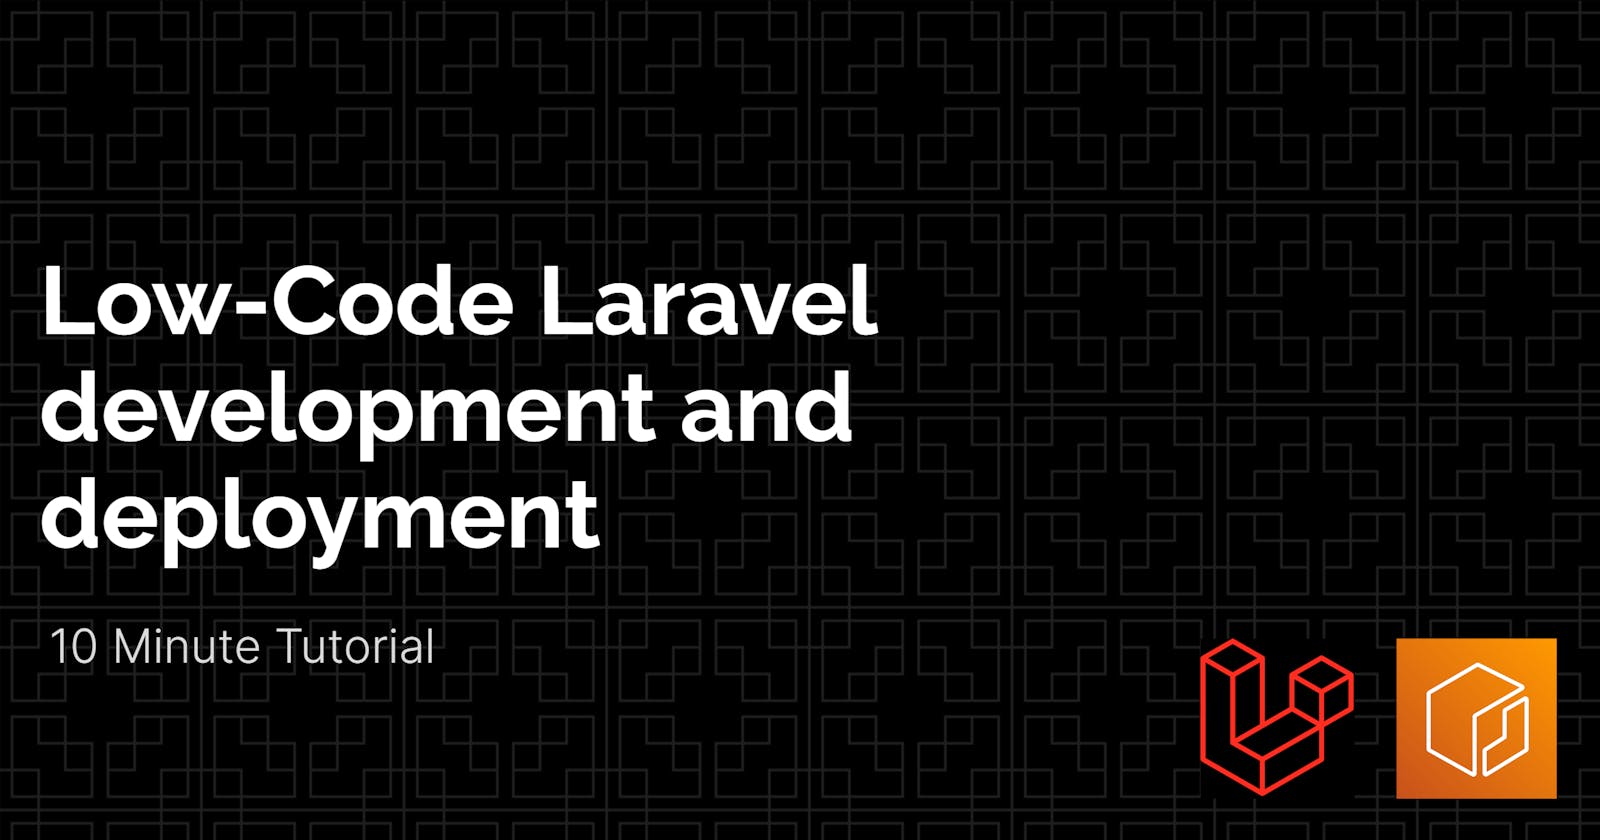 10 minute tutorial - Create and deploy a Laravel application using a low-code approach